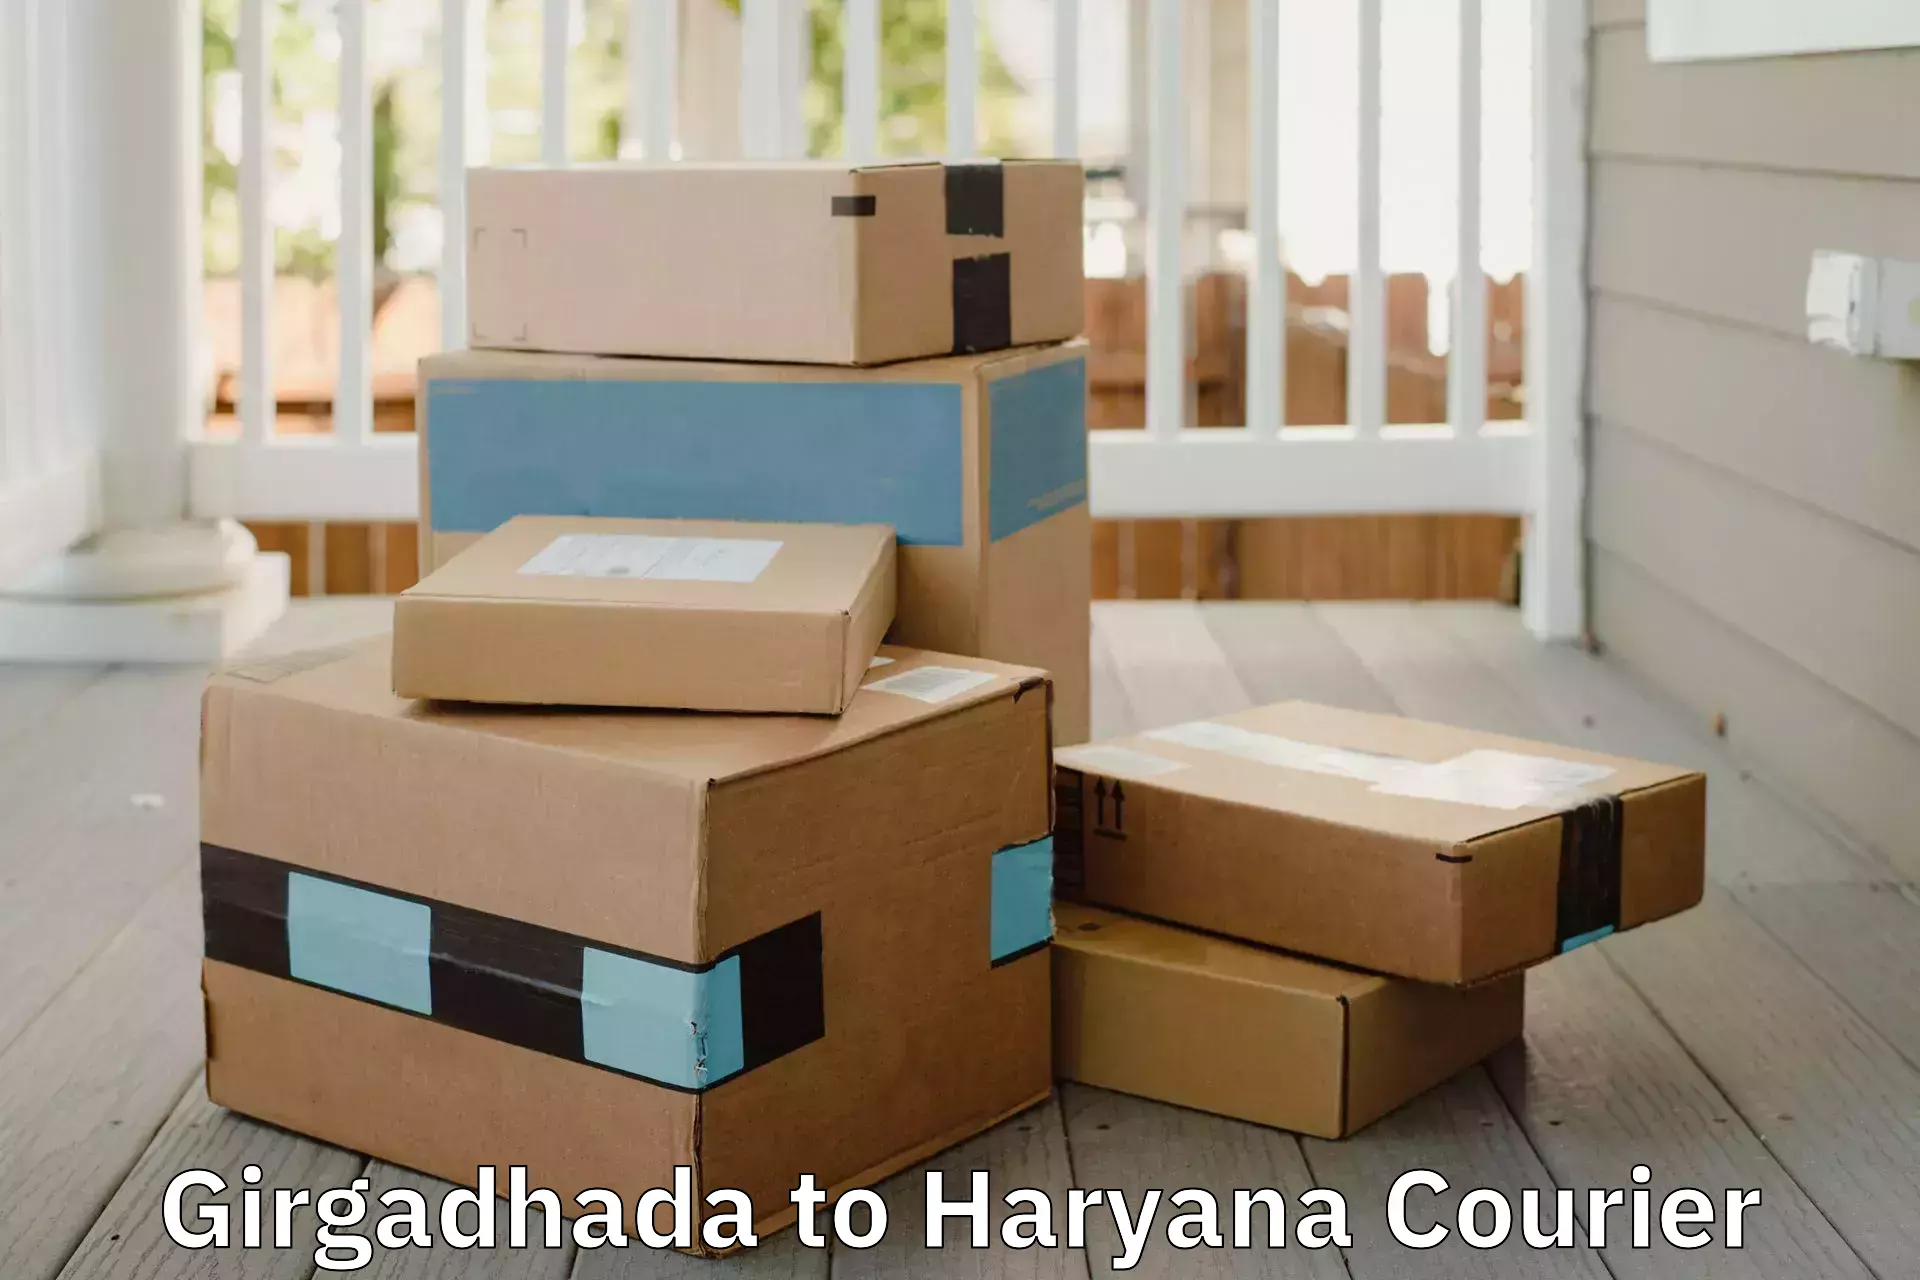 Residential relocation services Girgadhada to Fatehabad